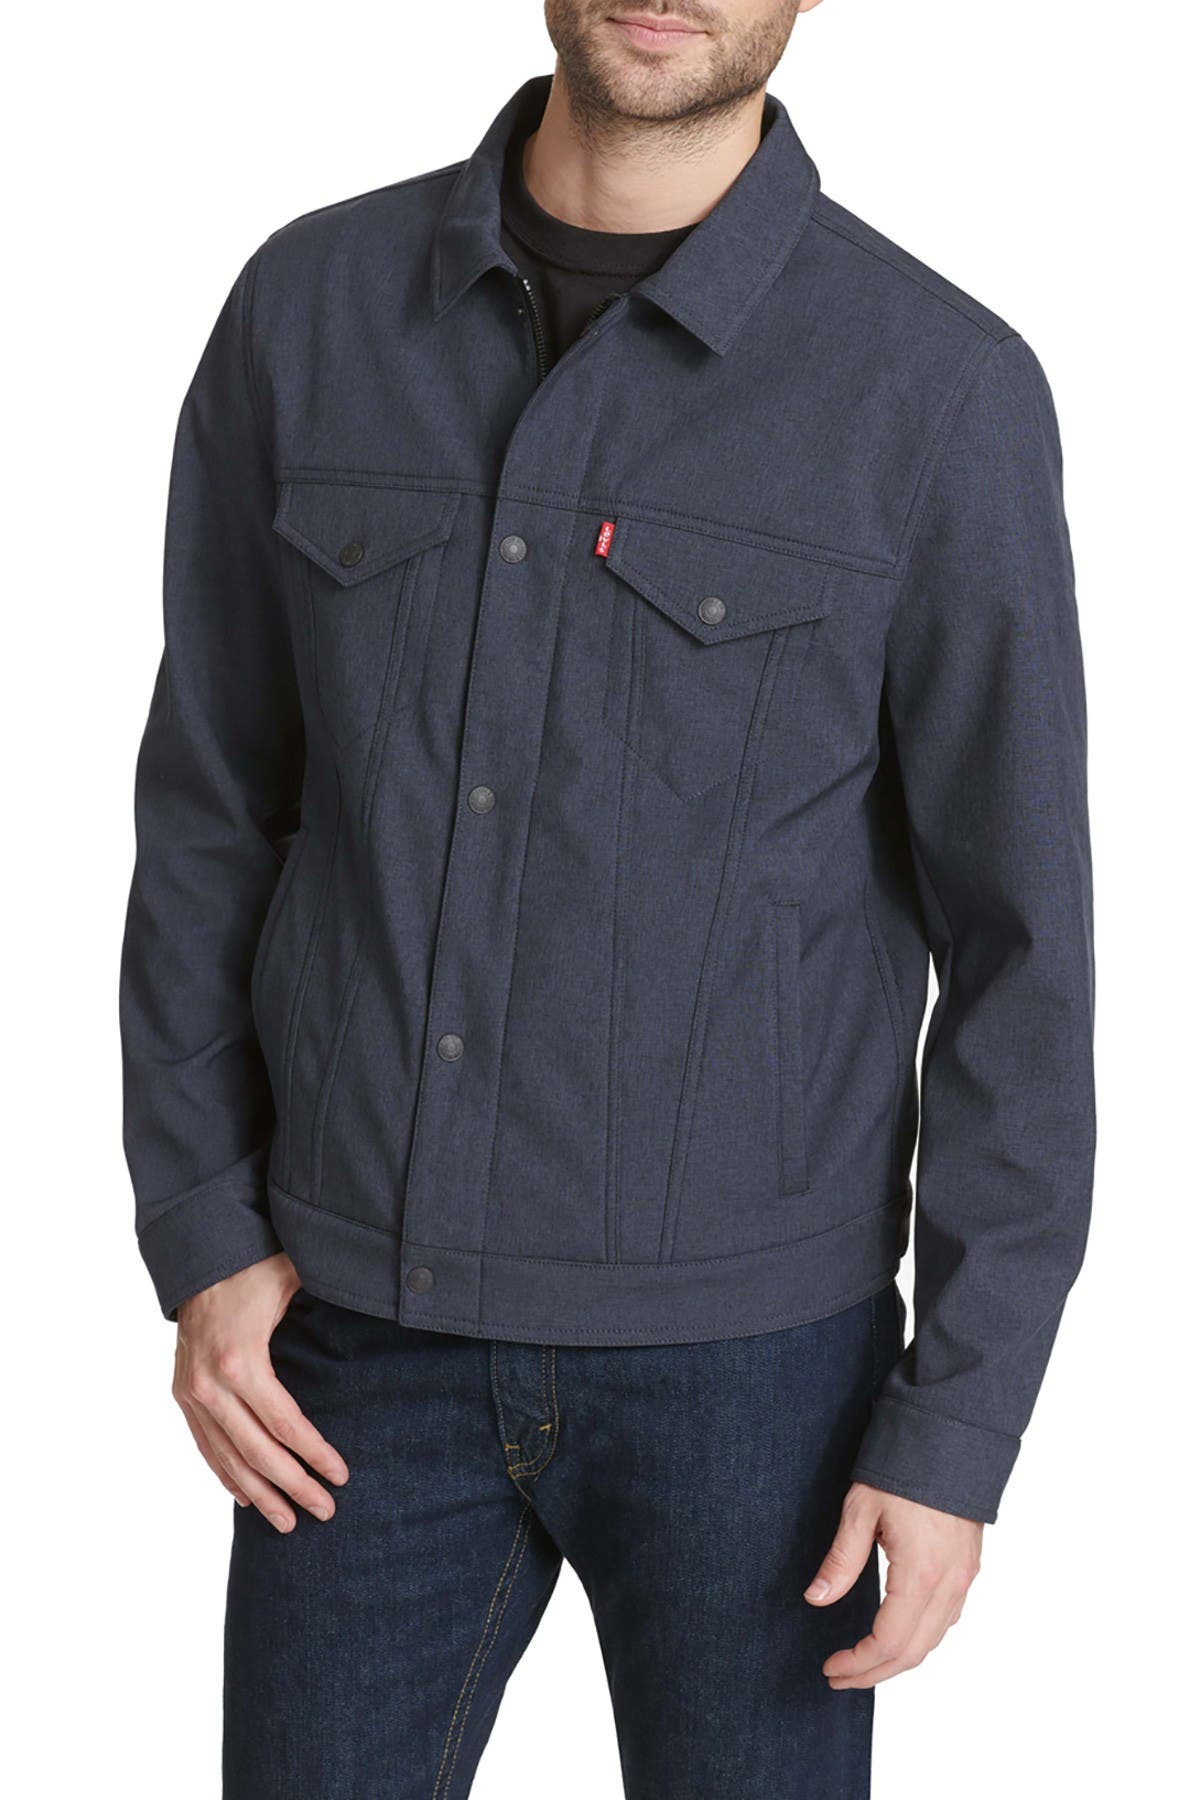 Levi's Classic Trucker Jacket In Htr Nvy Co | ModeSens